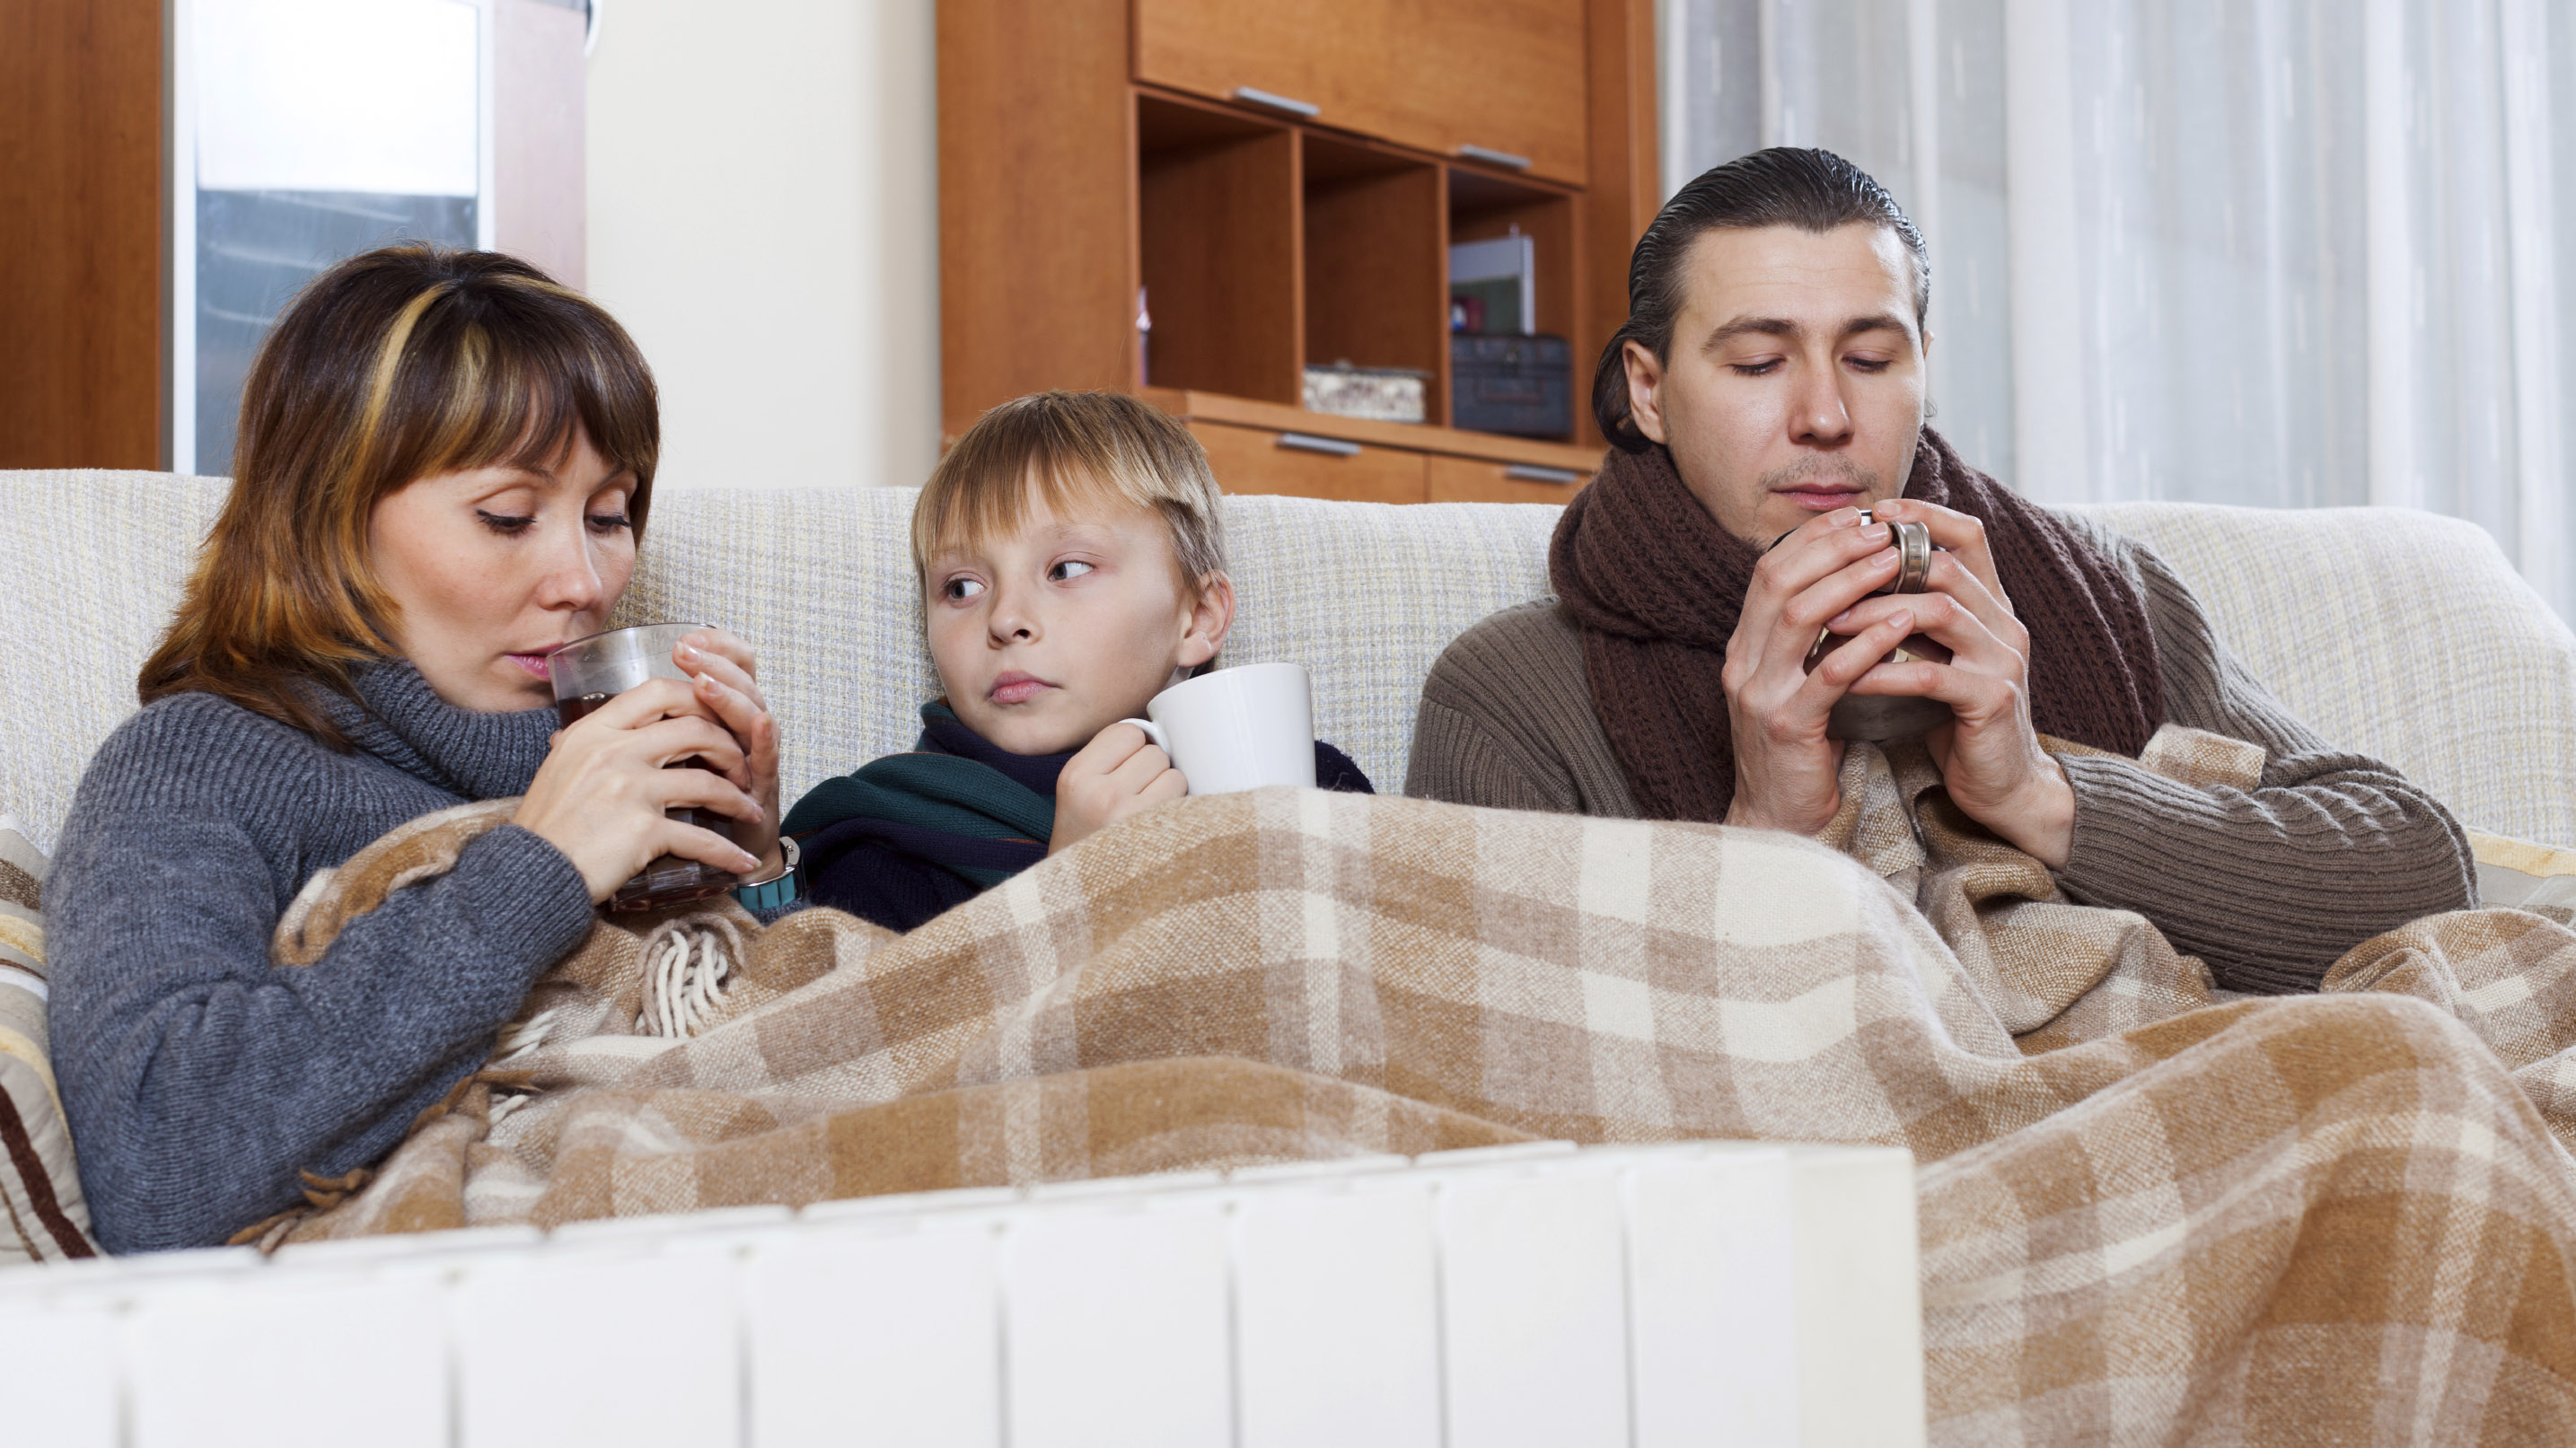 Cold family in house iStock 000033106944 Large